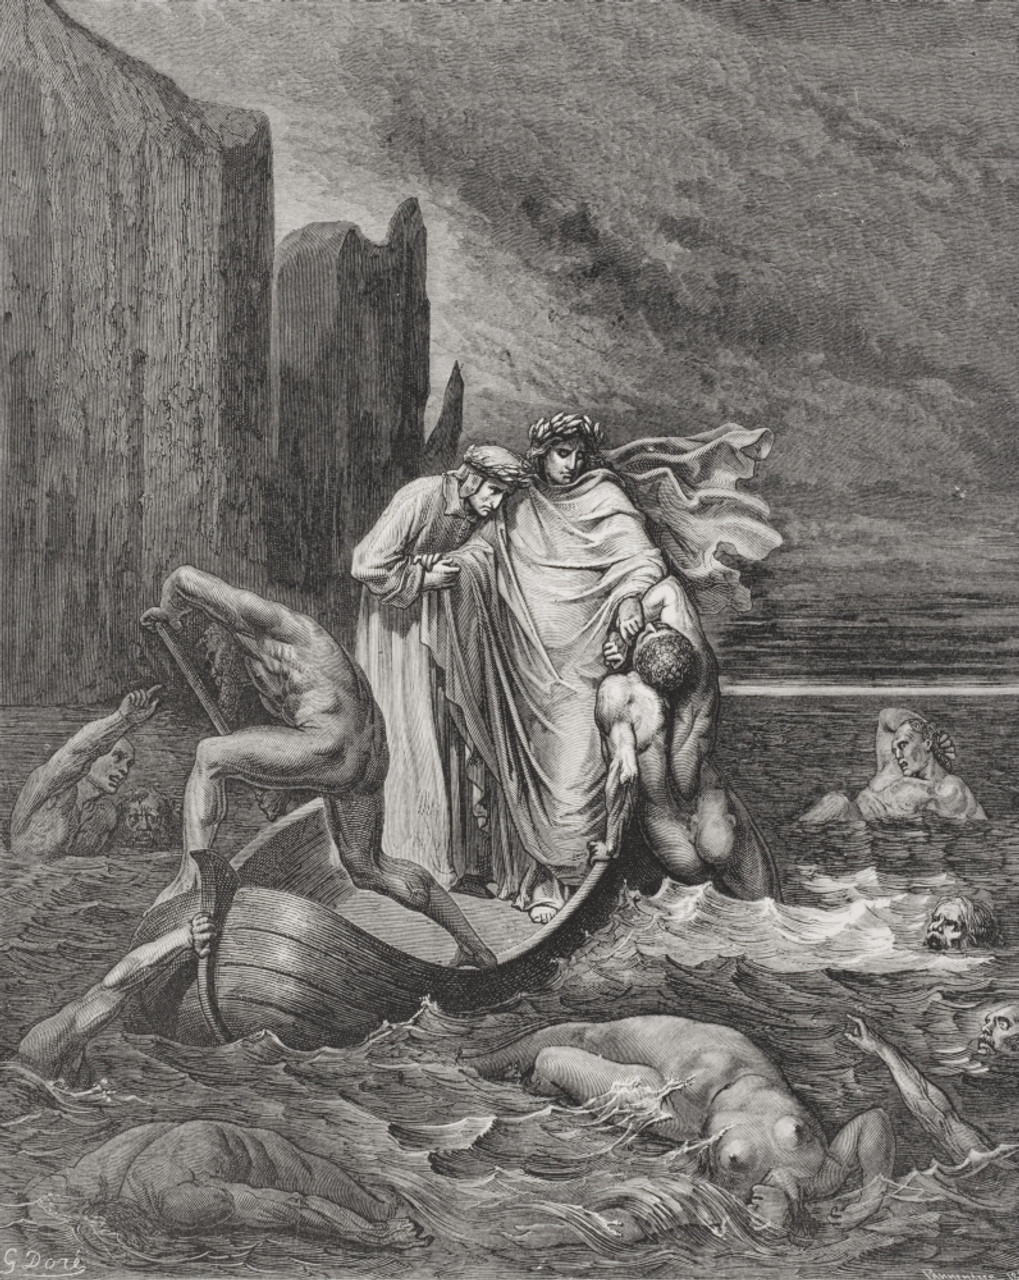 Engraving By Gustave Dore 1832-1883 French Artist And Illustrator For ...